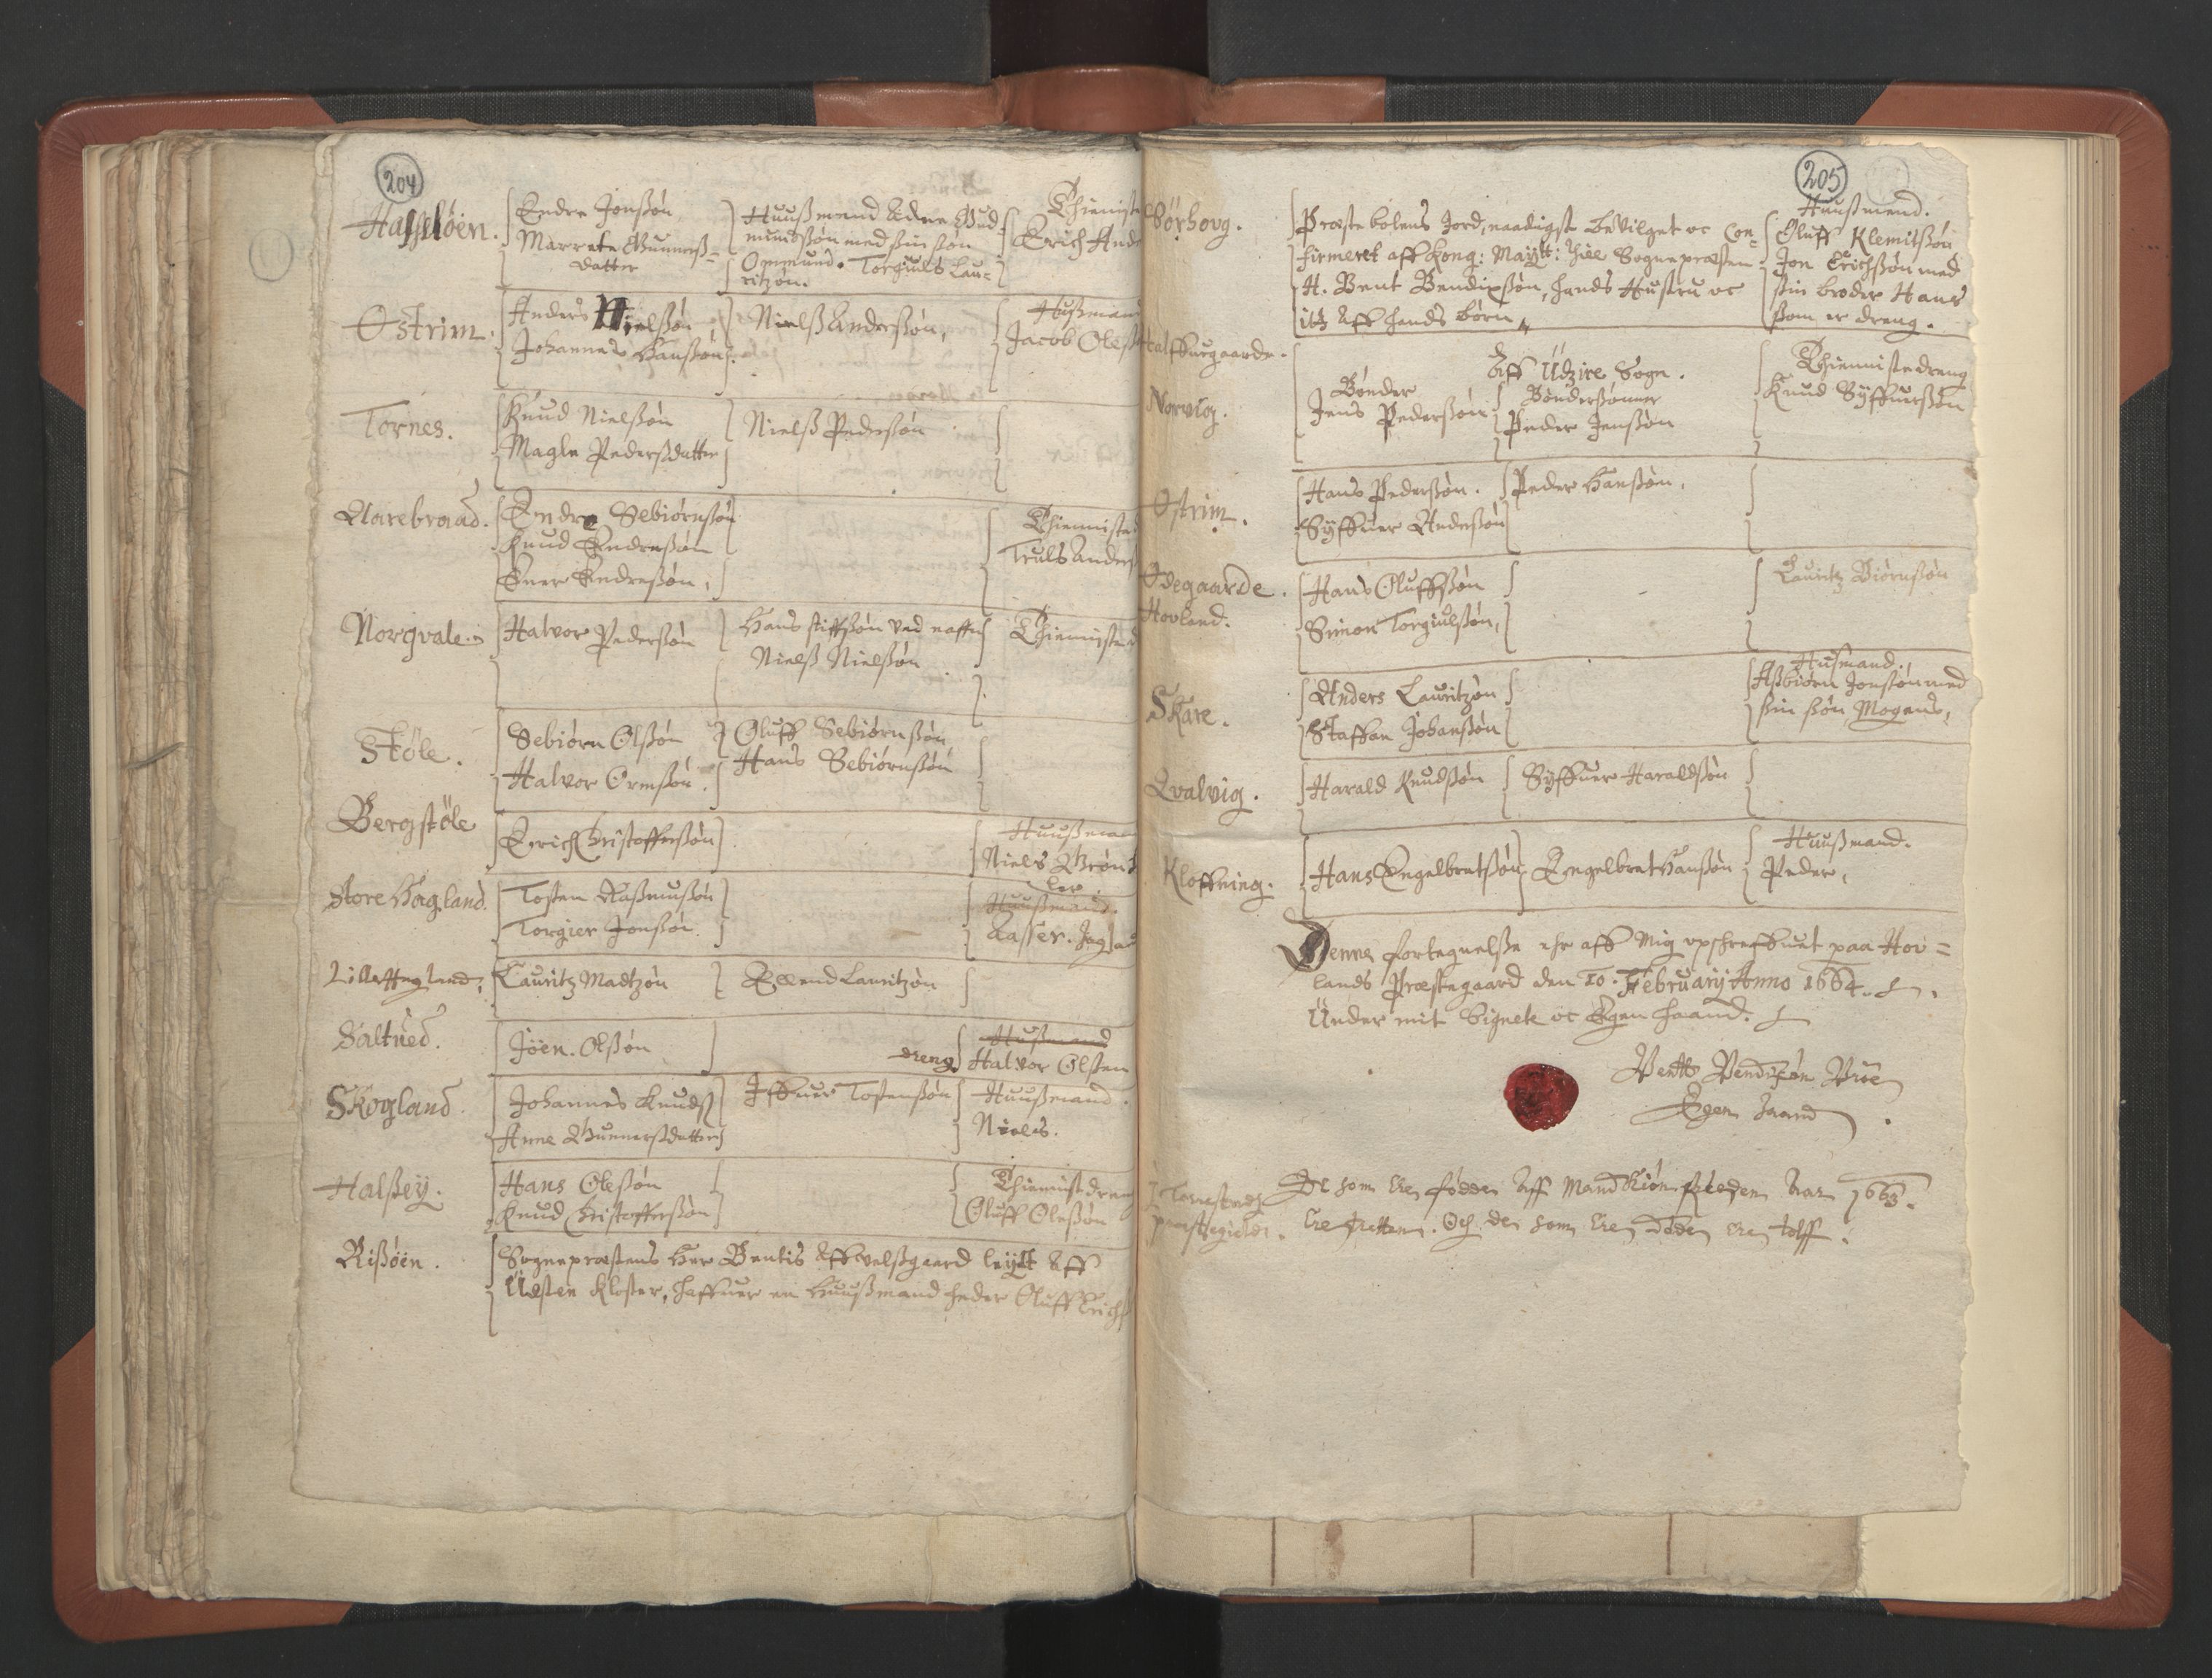 RA, Vicar's Census 1664-1666, no. 18: Stavanger deanery and Karmsund deanery, 1664-1666, p. 204-205